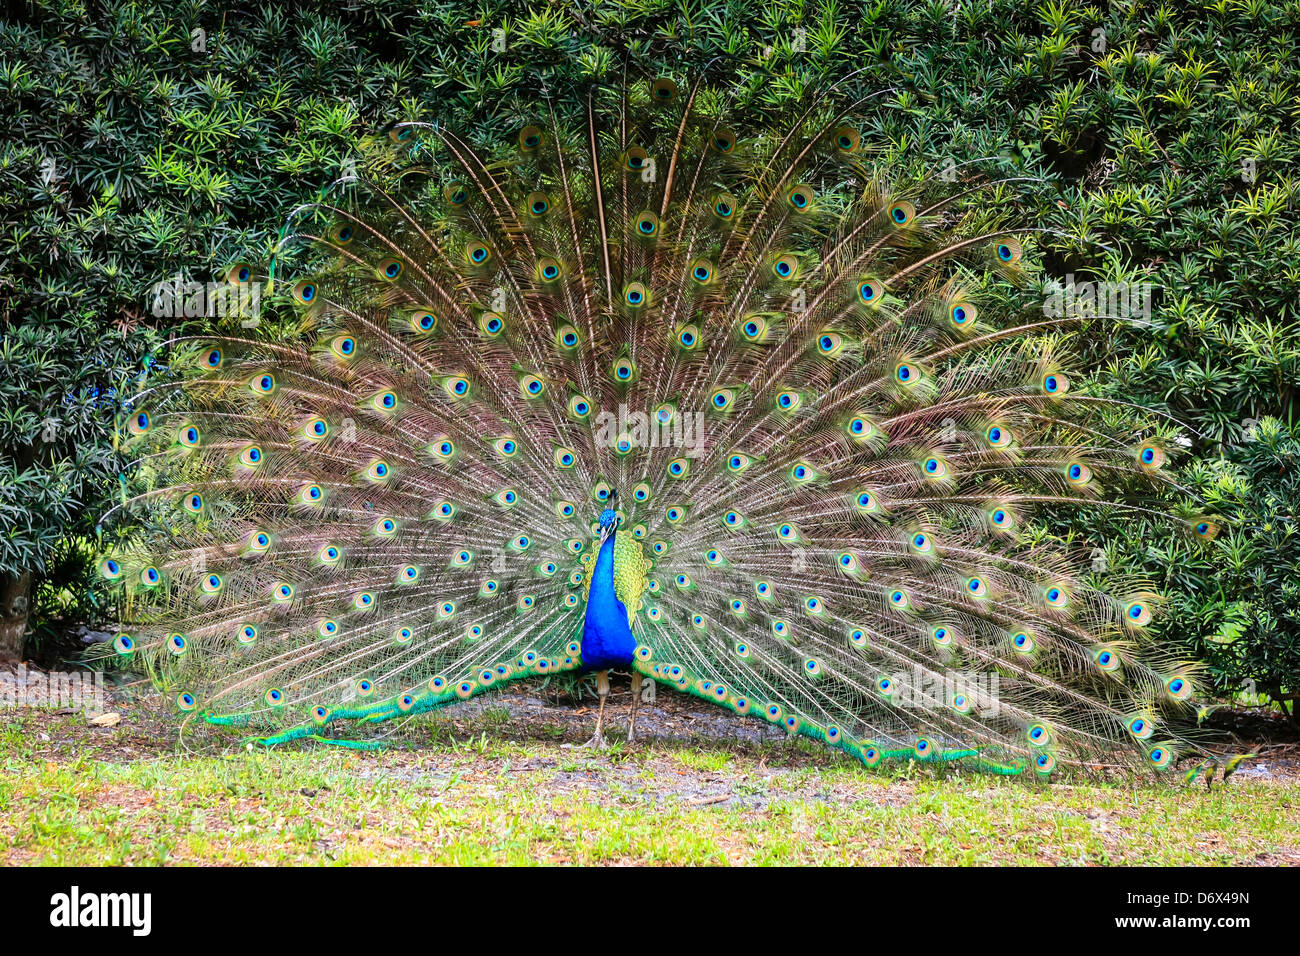 Male Peacock performing his courtship routine during spring season Stock Photo